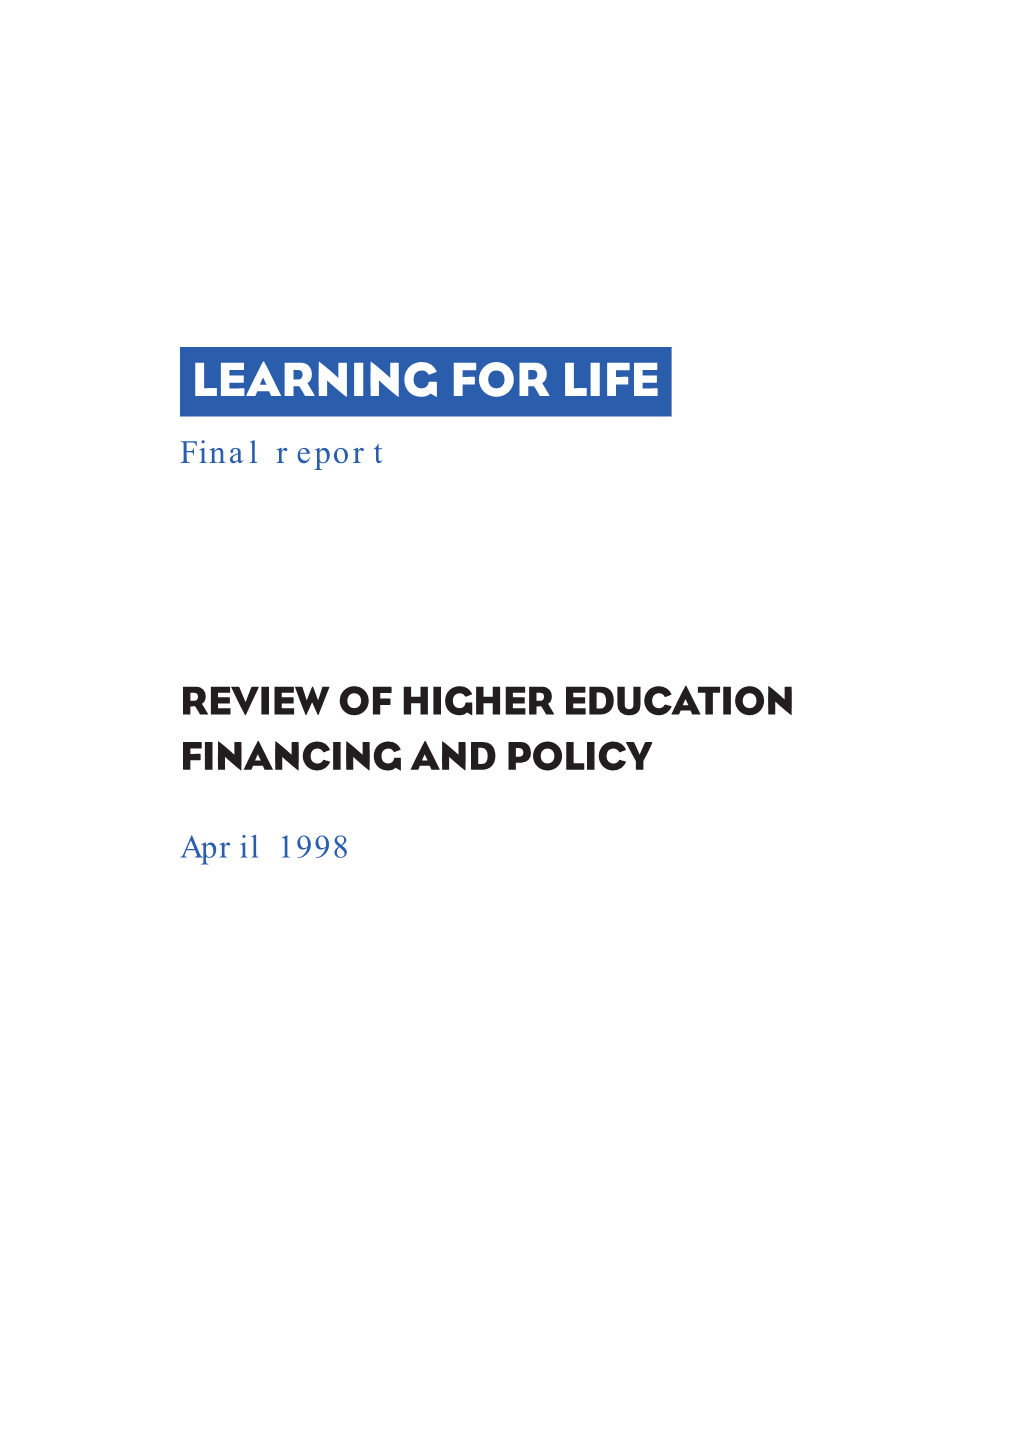 Learning for Life: Review of Higher Education Financing and Policy